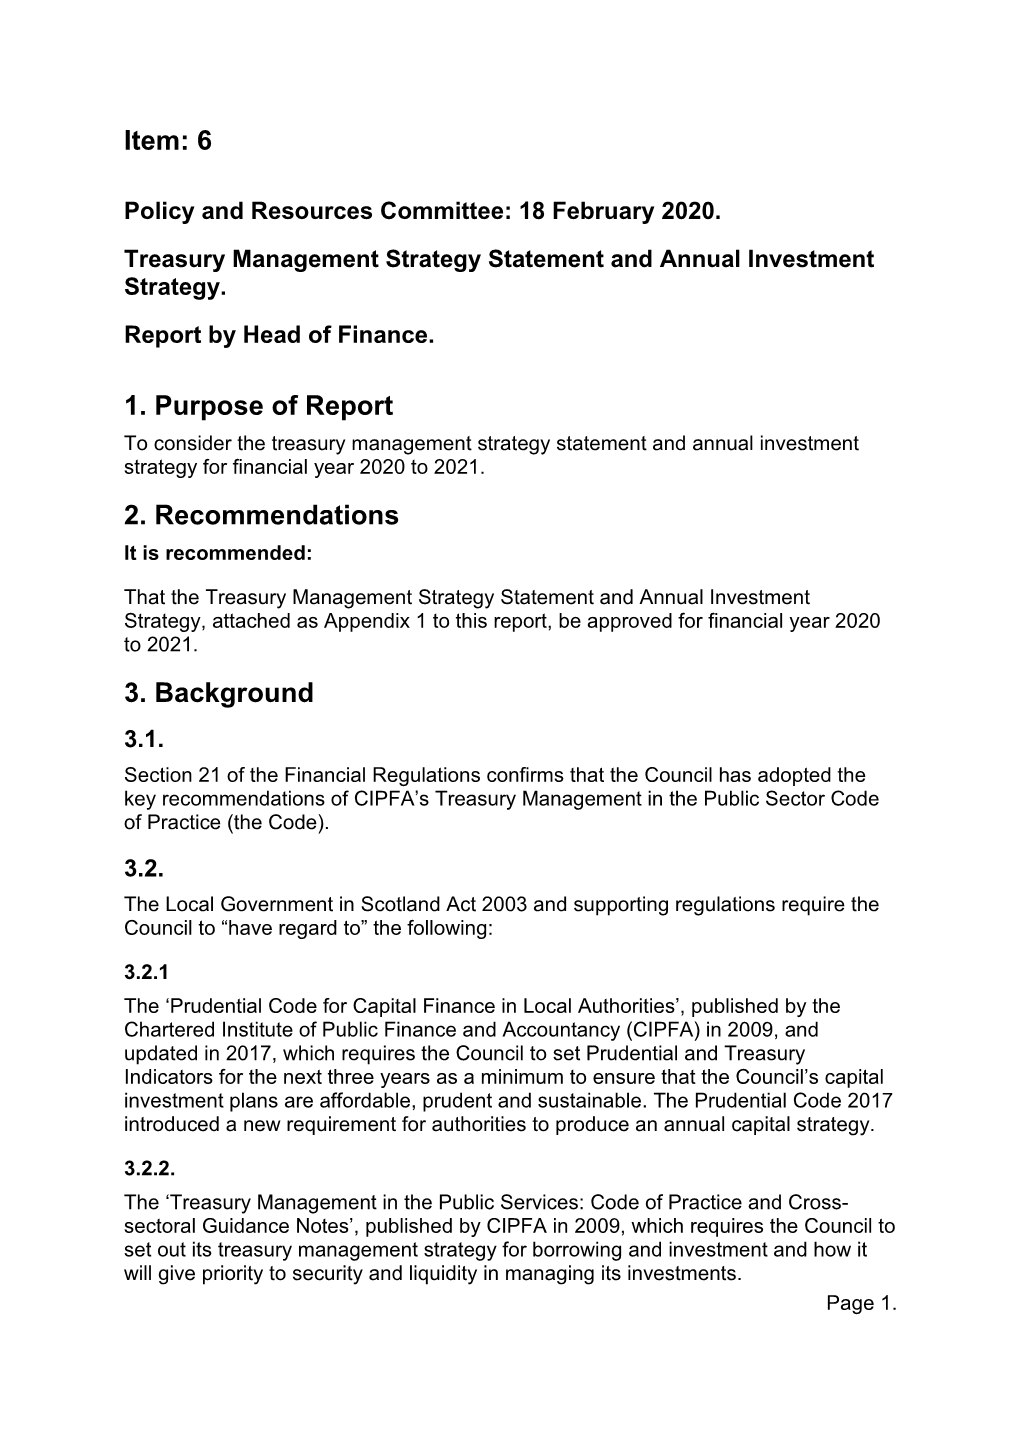 Treasury Management Strategy Statement and Annual Investment Strategy